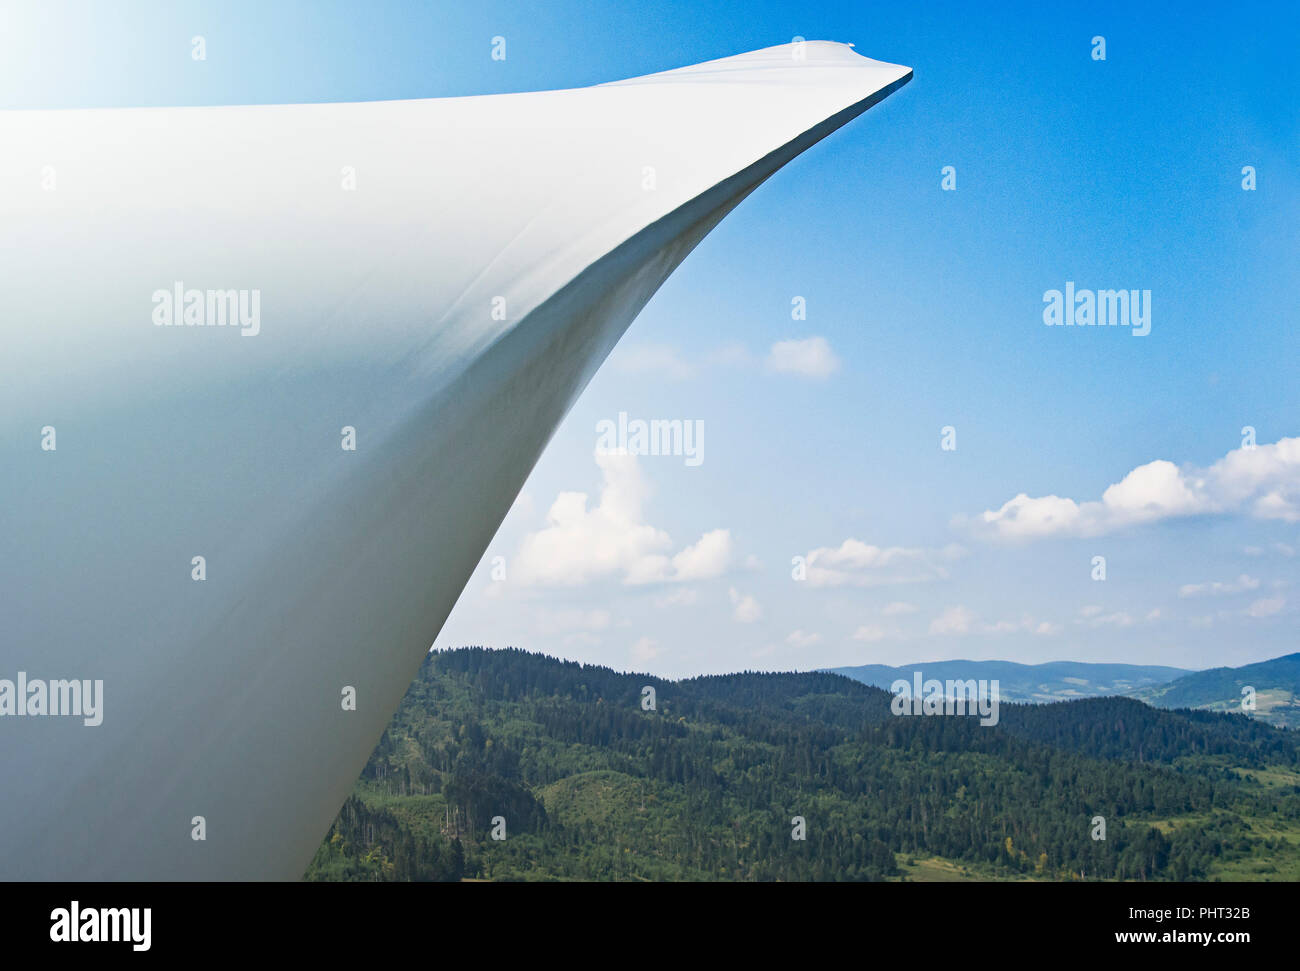 Wind turbine from aerial view - Sustainable development, environment friendly, renewable energy concept. Stock Photo